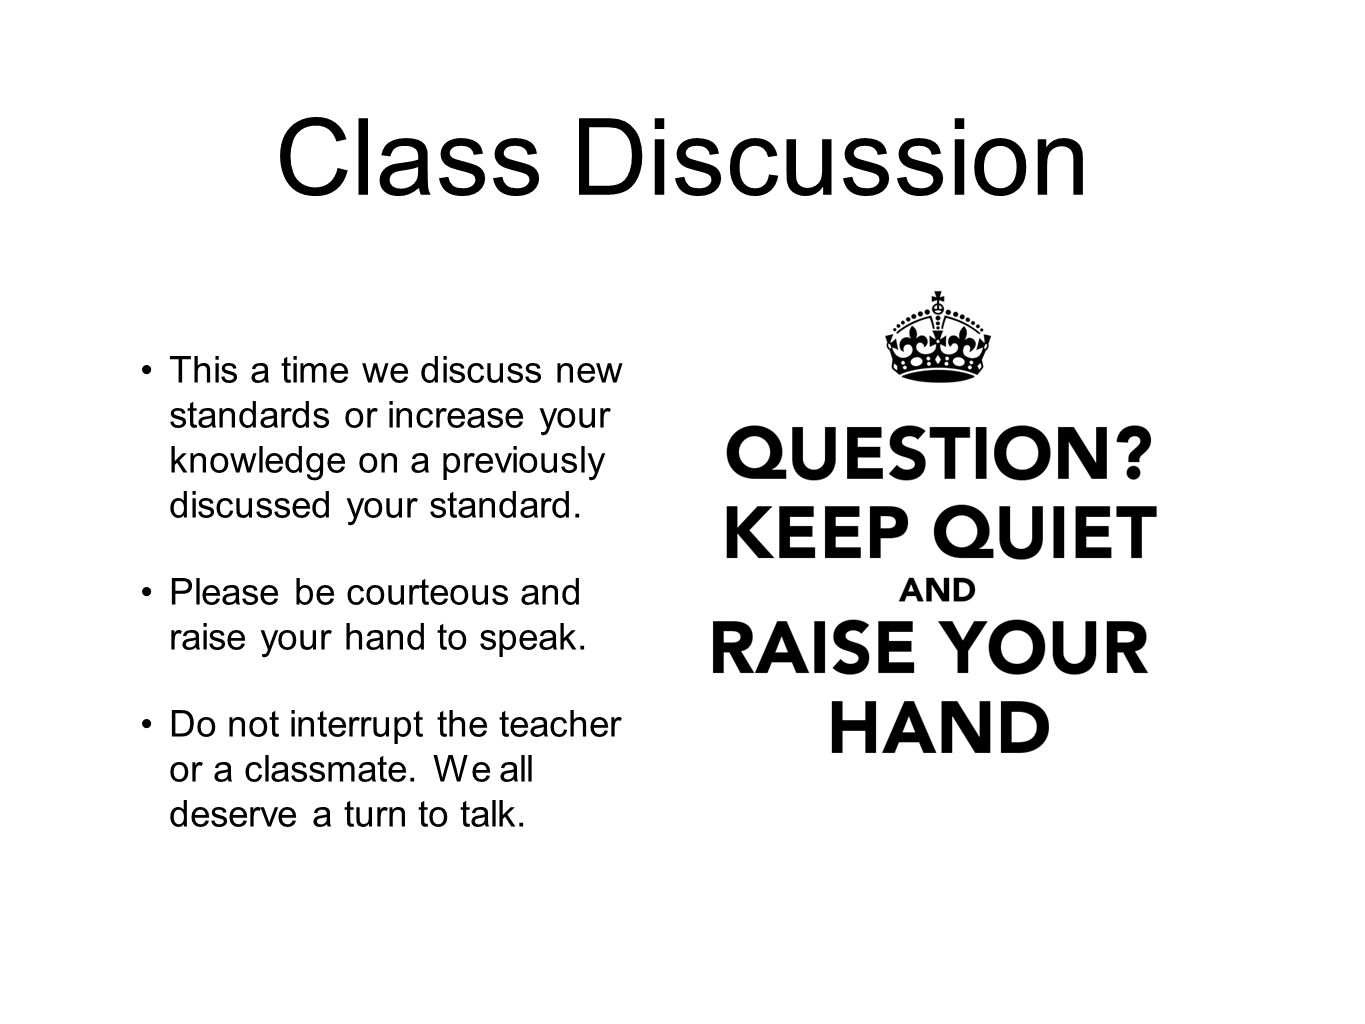 Class Discussion This a time we discuss new standards or increase your knowledge on a previously discussed your standard.